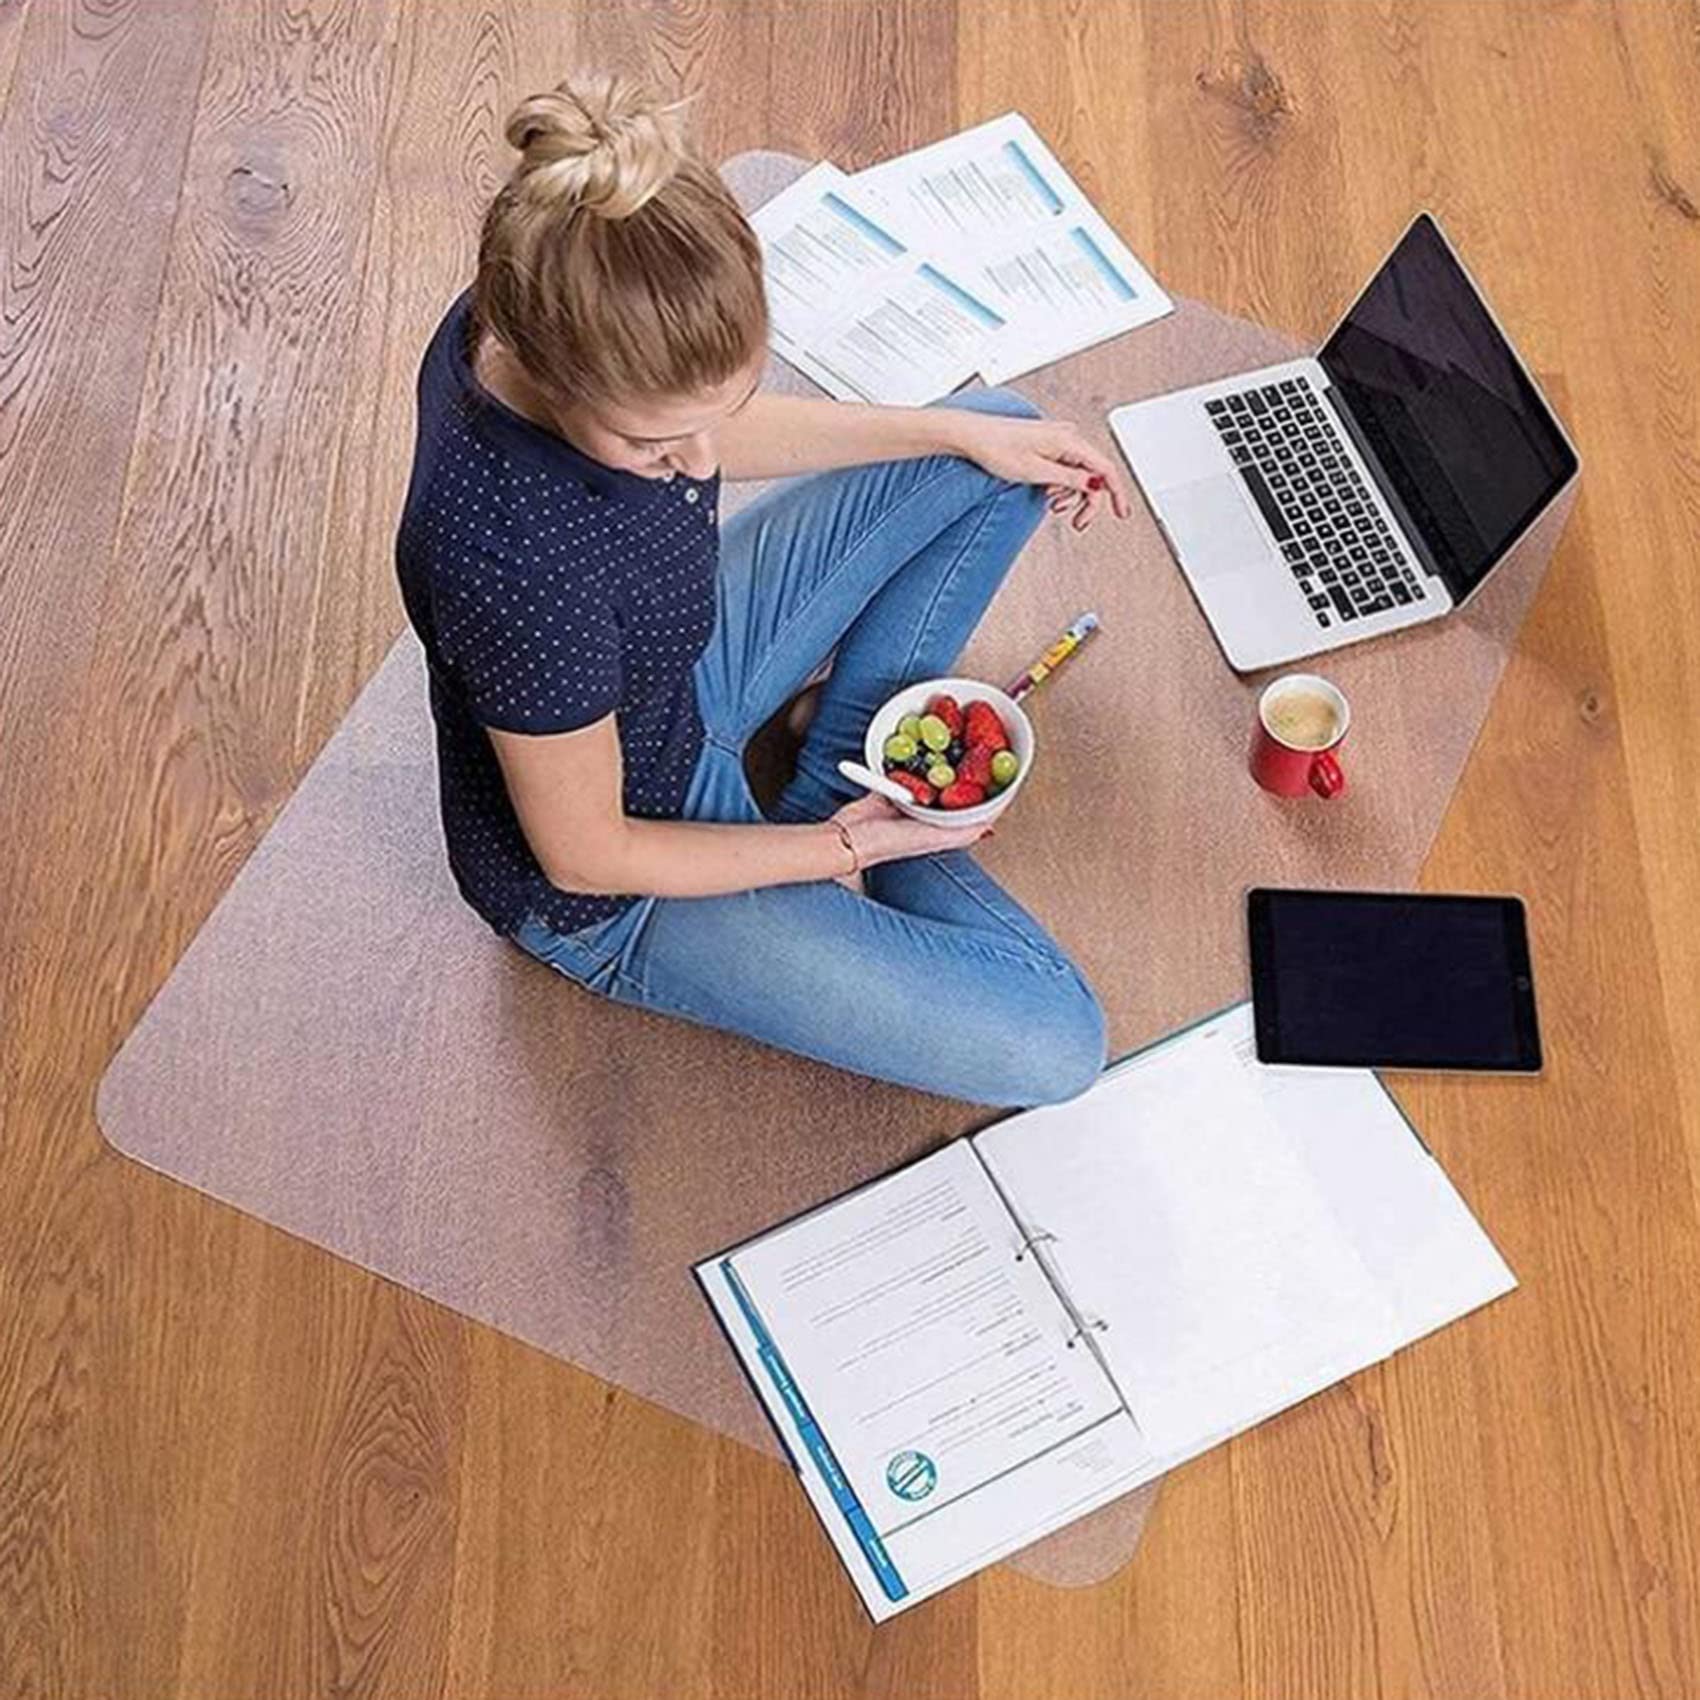 Clear PVC Desk Chair Mat Clear Chair Mat Transparent Clear Floor Protector Carpet for Hard Surface Floors, Non Slip Easy Clean Area Rug Pad,Thick 1.5mm,60/80/90/100/120cm wide,Area Rugs Hallway PVC Tr